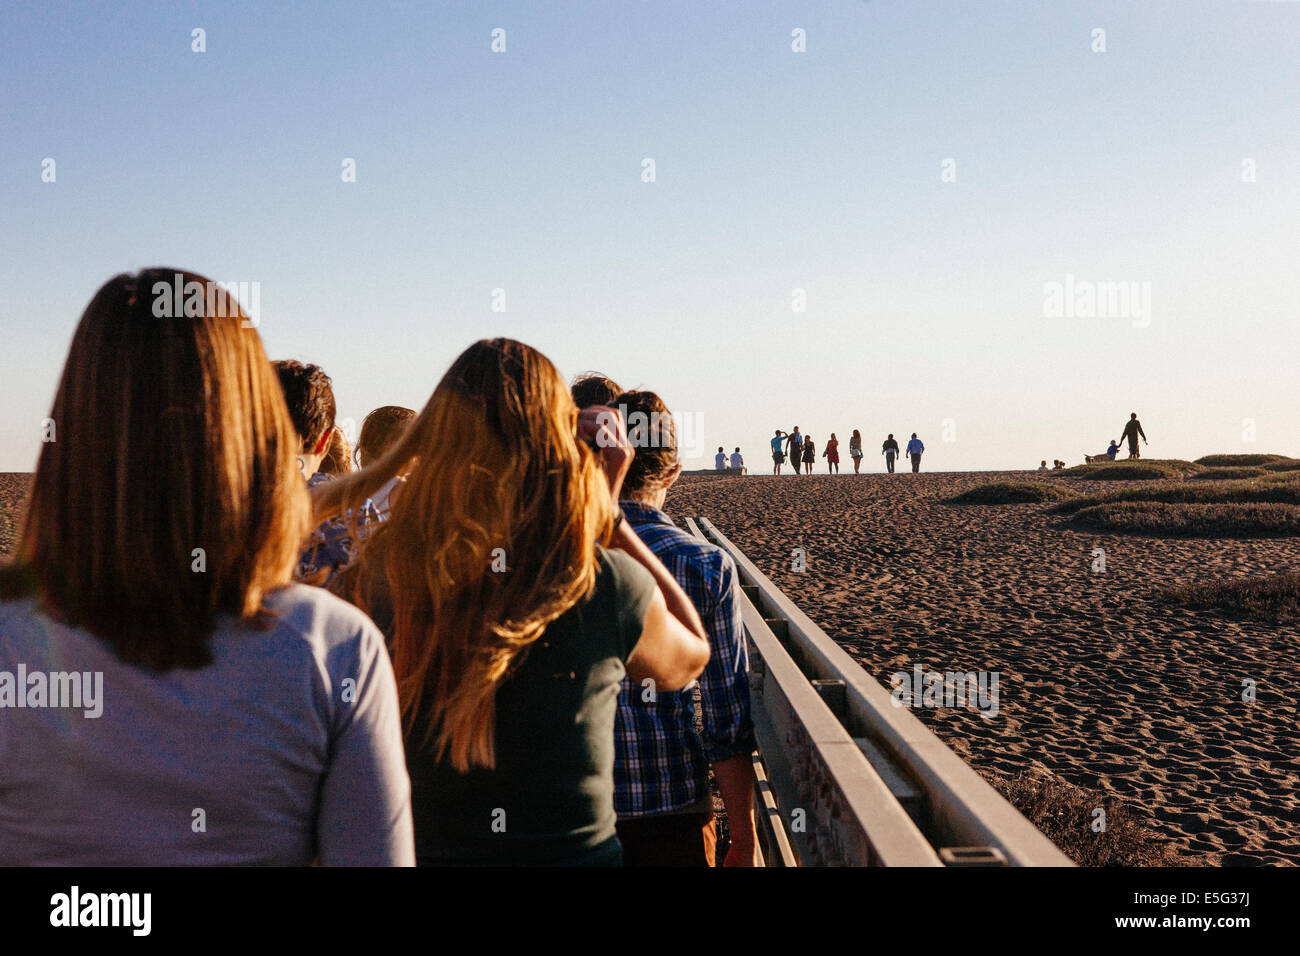 Back view of people walking in line Stock Photo